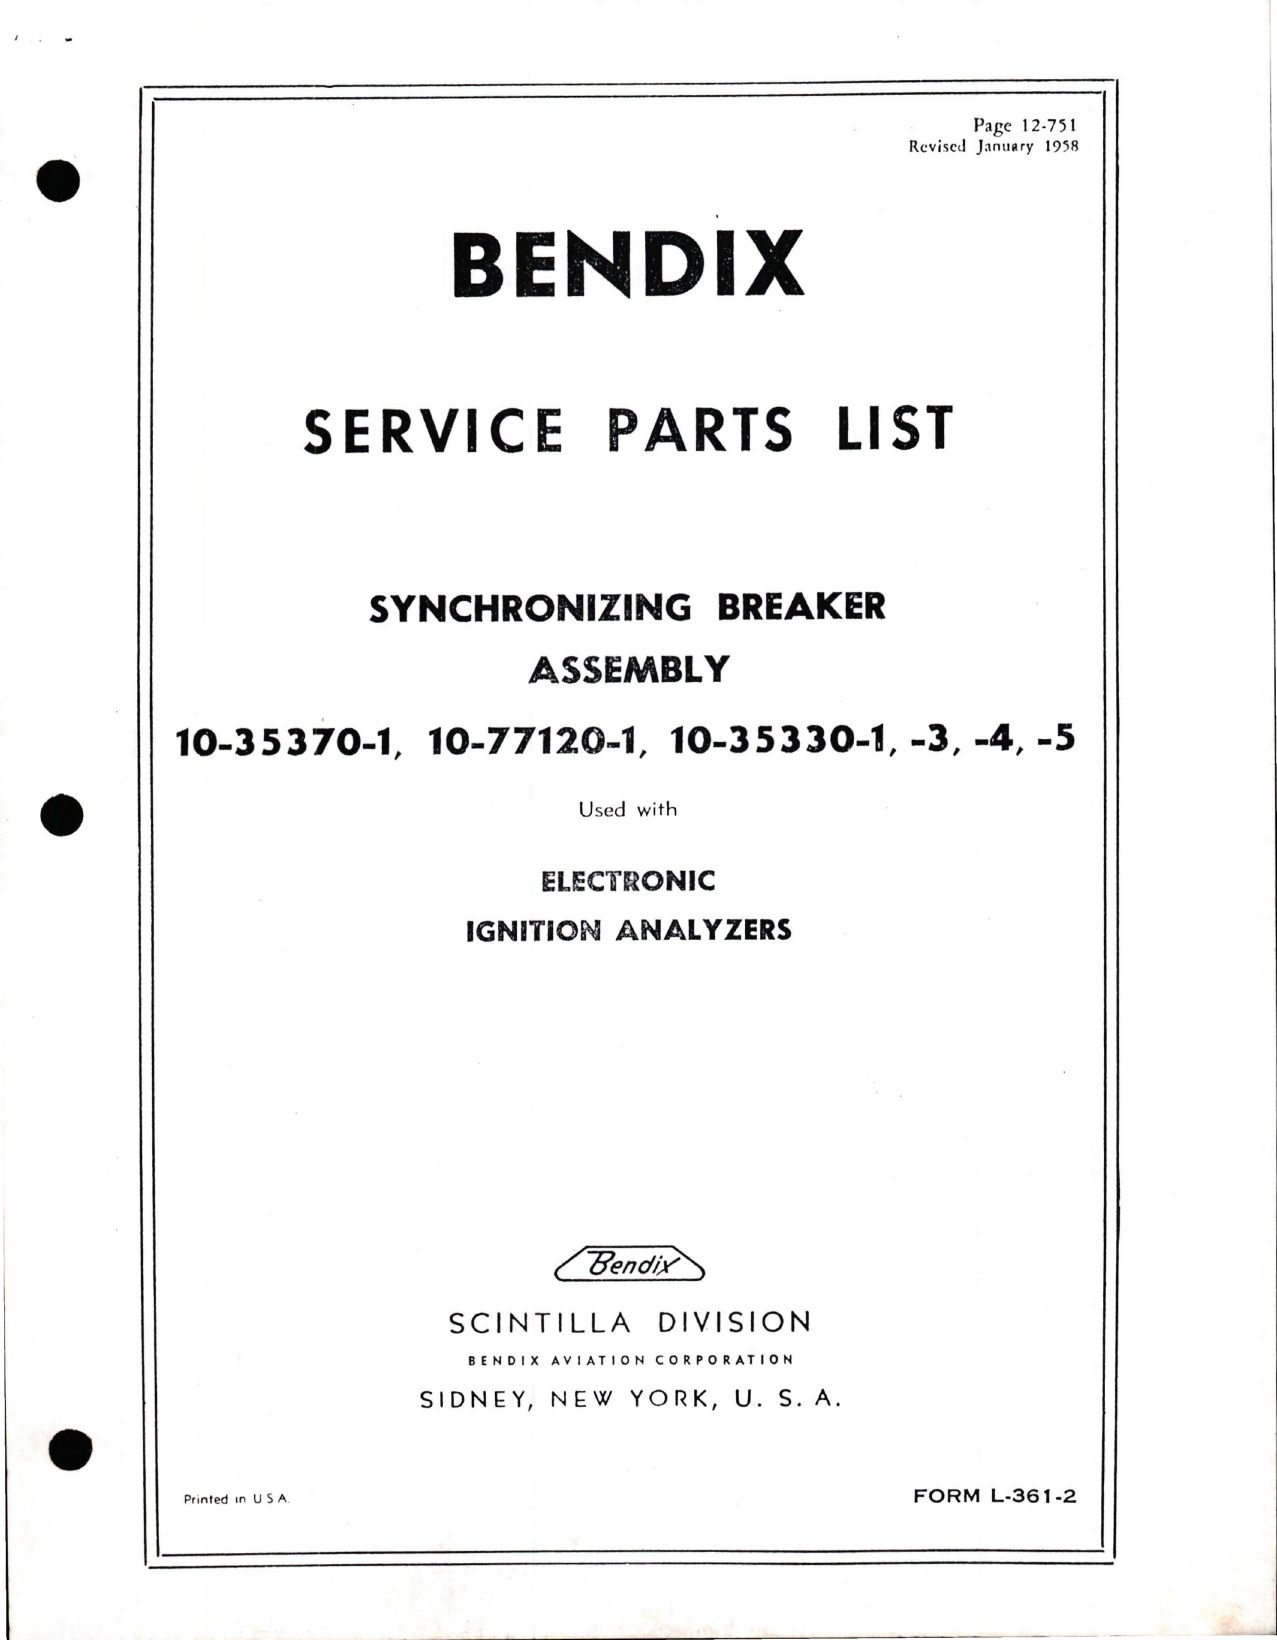 Sample page 1 from AirCorps Library document: Service Parts List for Synchronizing Breaker Assembly